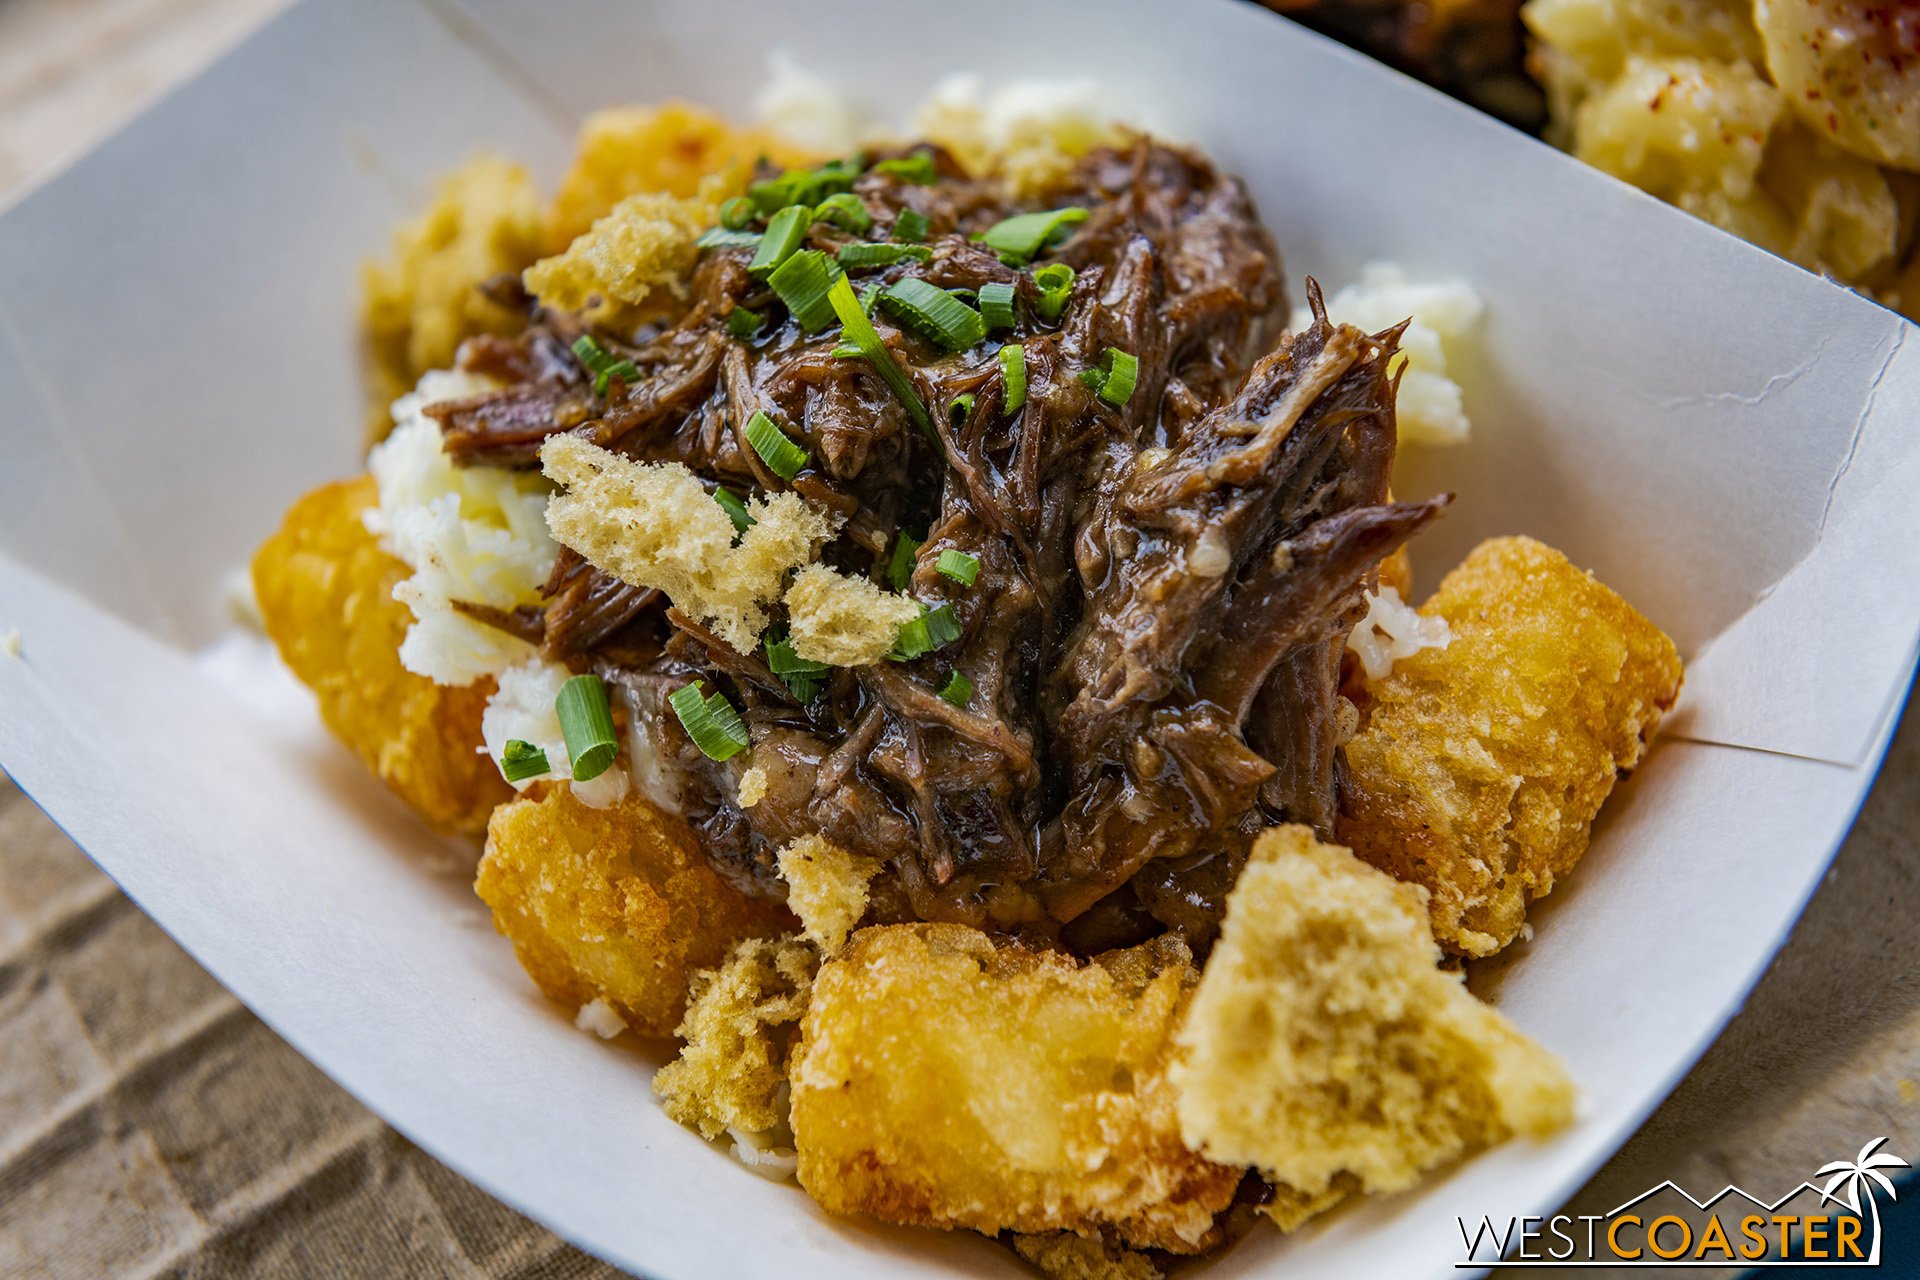  D*Lish: Black &amp; Tan Beef Potato Puffs: Karl Strauss Wreck Alley stout gravy and lager micro sponge  I guess Potato Puffs are the new fancy terminology for tater tots.  This was basically a pulled beef pot roast, and it was rich and hearty and ta